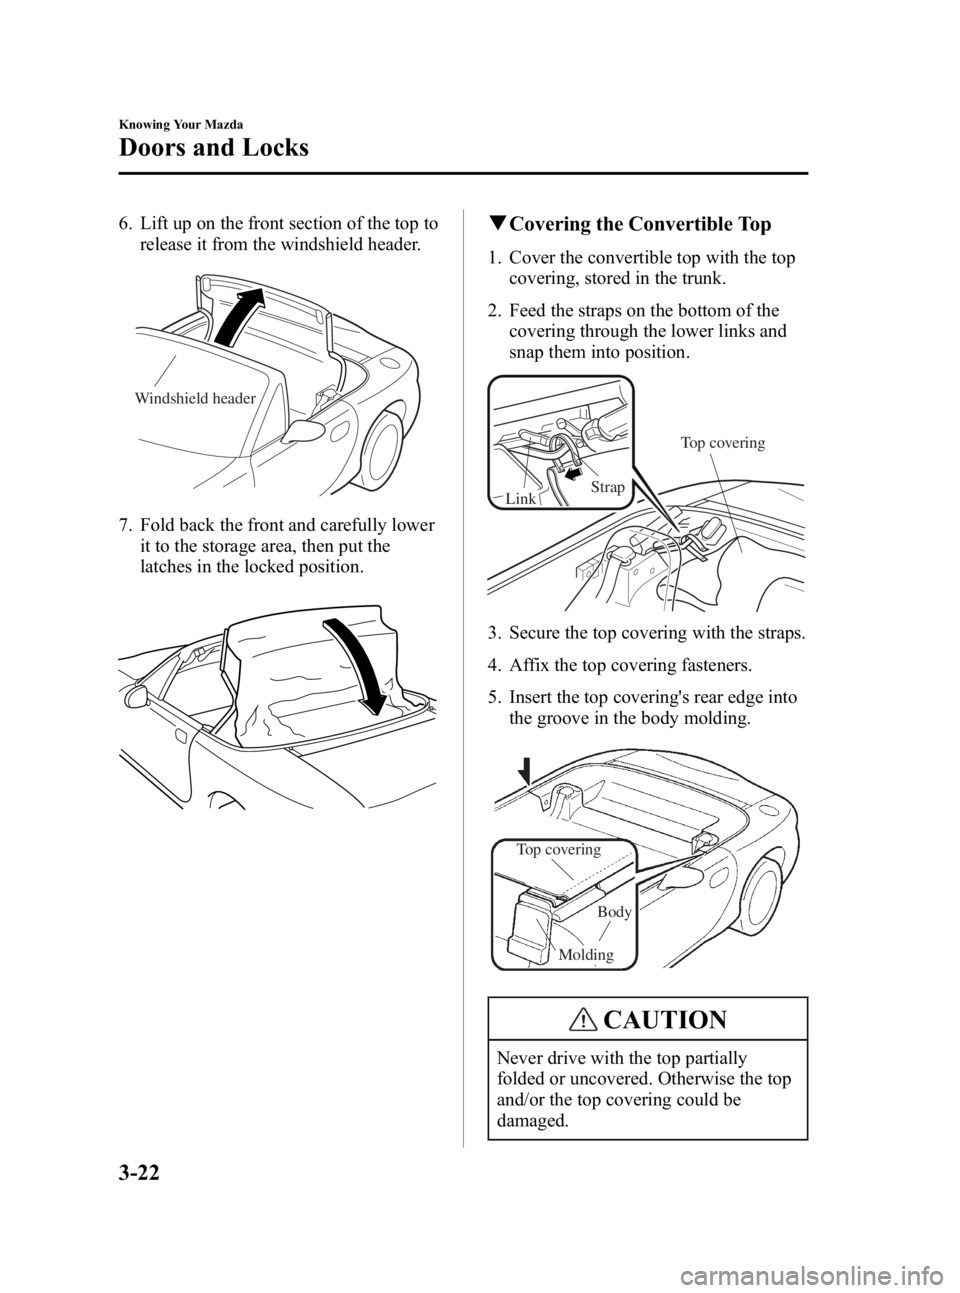 MAZDA MODEL MX-5 MIATA 2005  Owners Manual Black plate (64,1)
6. Lift up on the front section of the top torelease it from the windshield header.
Windshield header
7. Fold back the front and carefully lower
it to the storage area, then put the